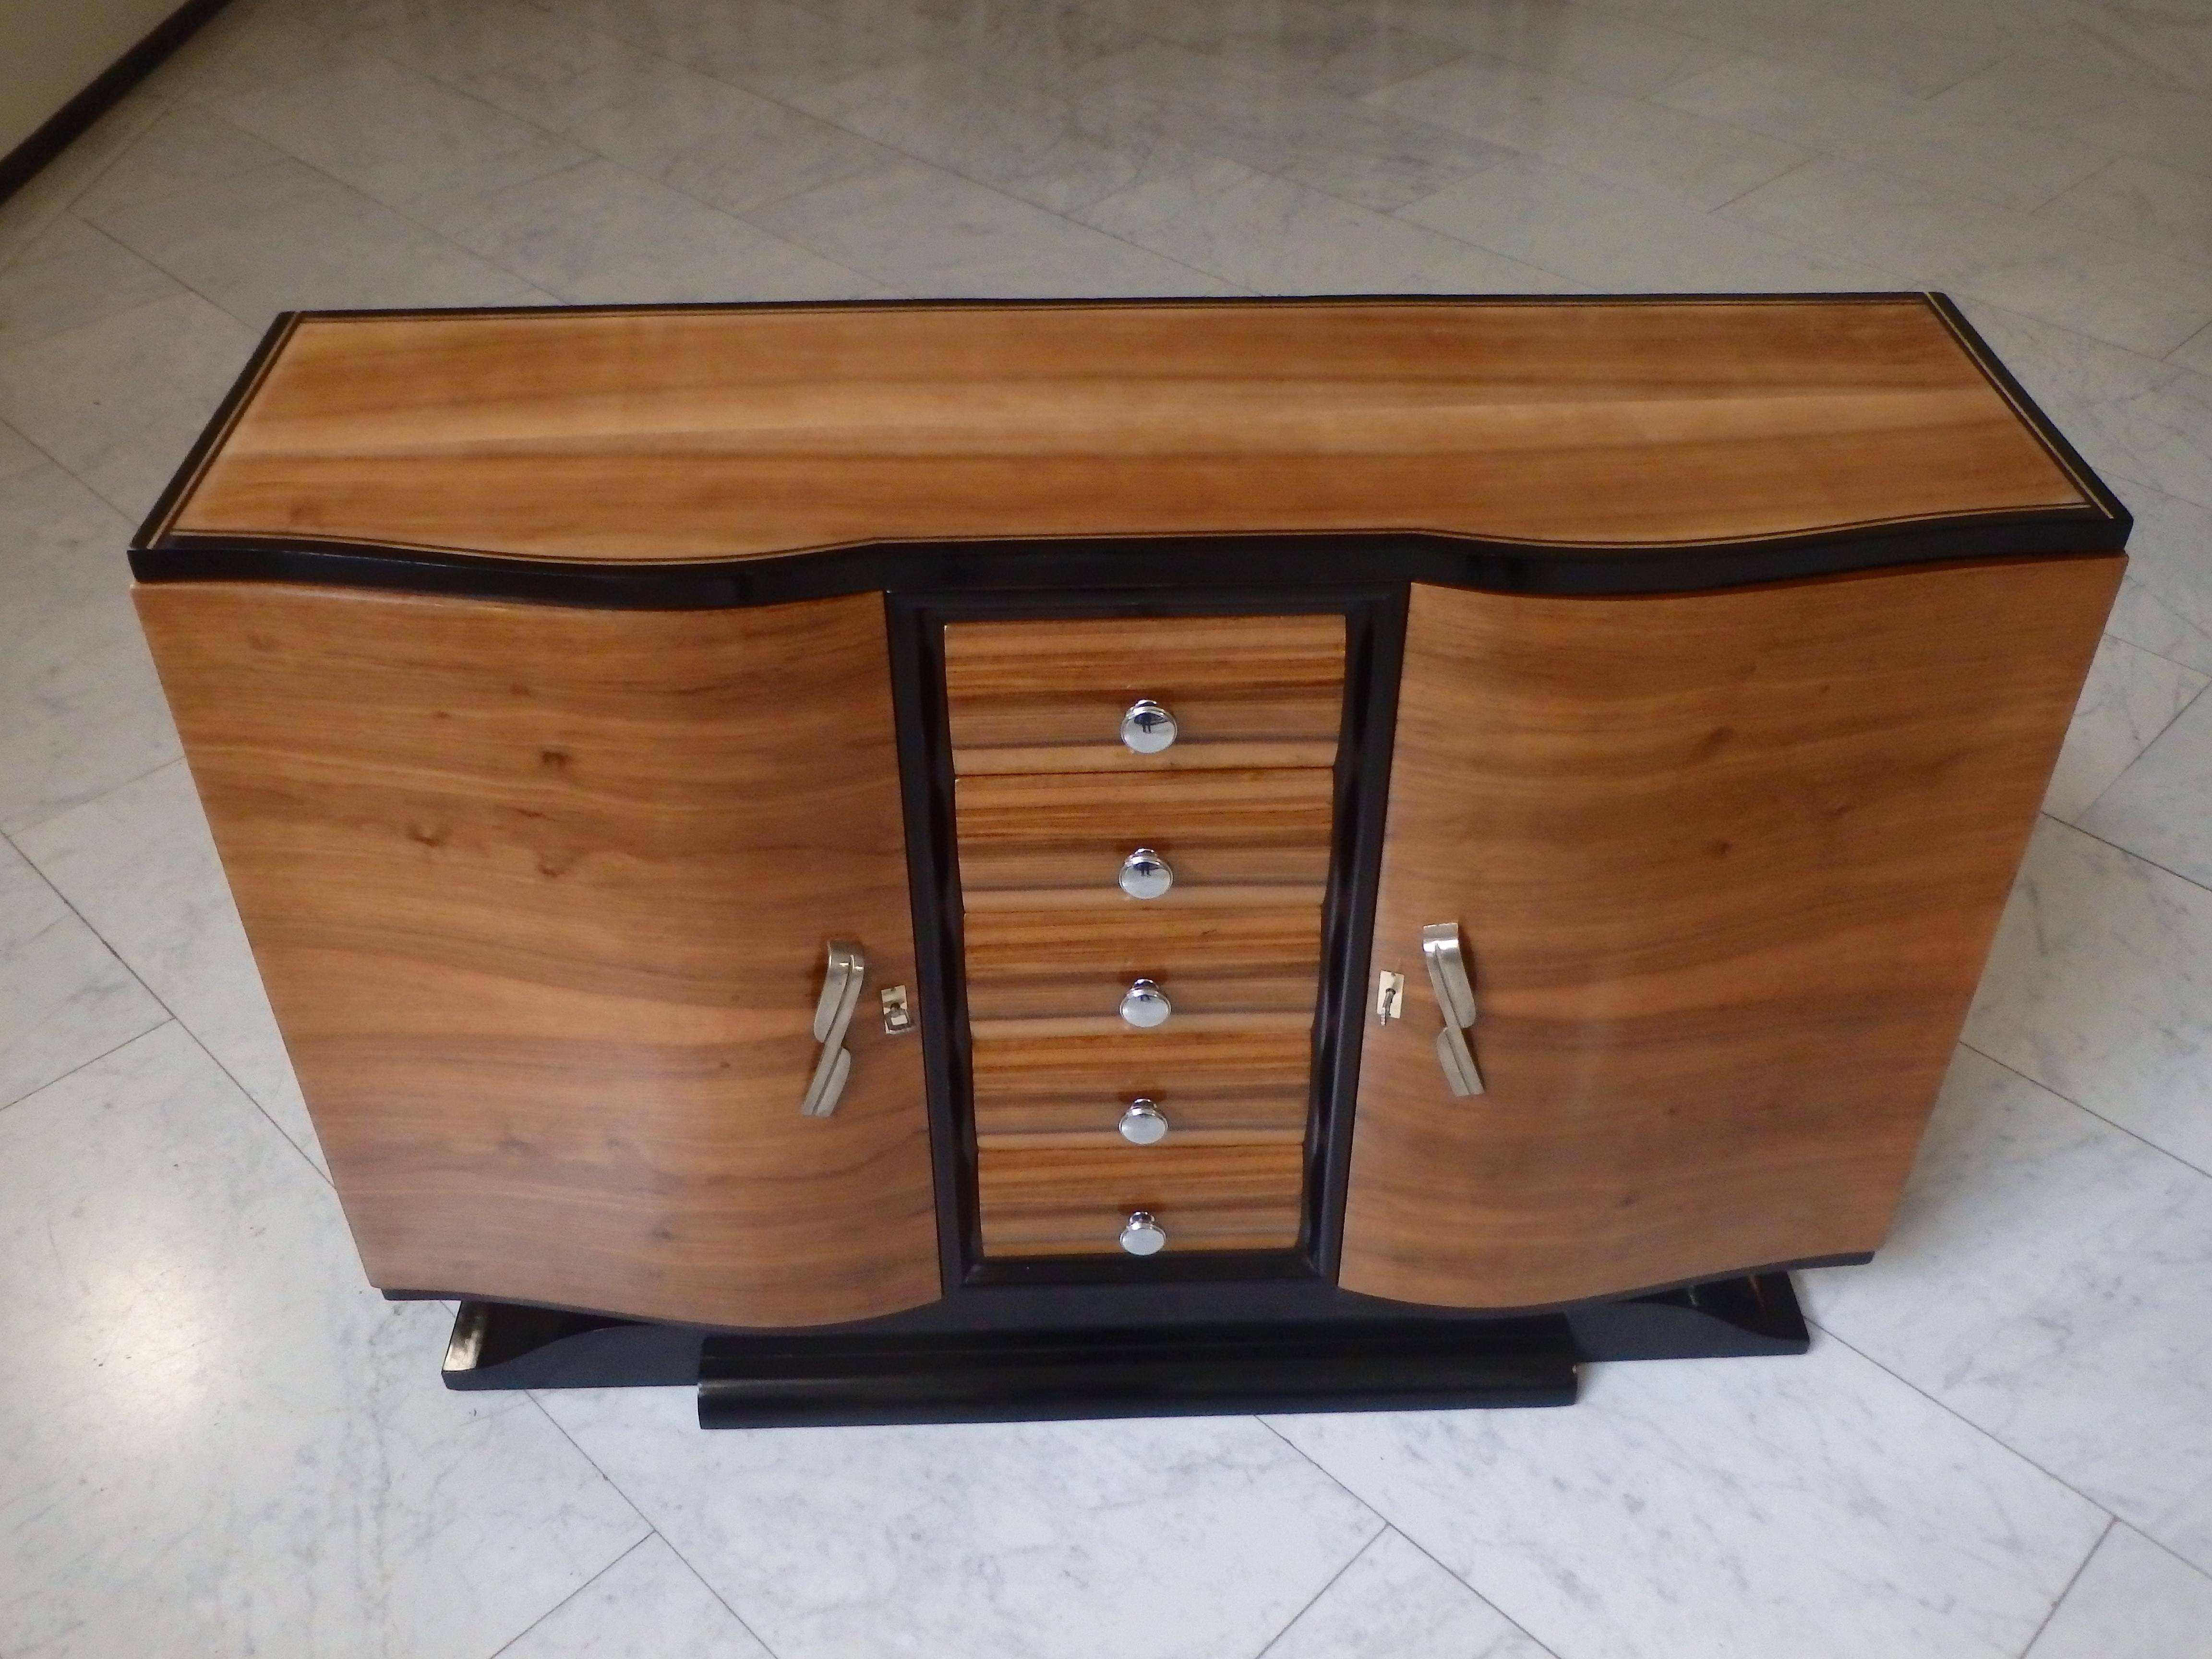 Art Deco sideboard with 5 drawers rounded doors chrome handles mustache foot
has one shelf on each side . Elegant and sophisticated with black highlights